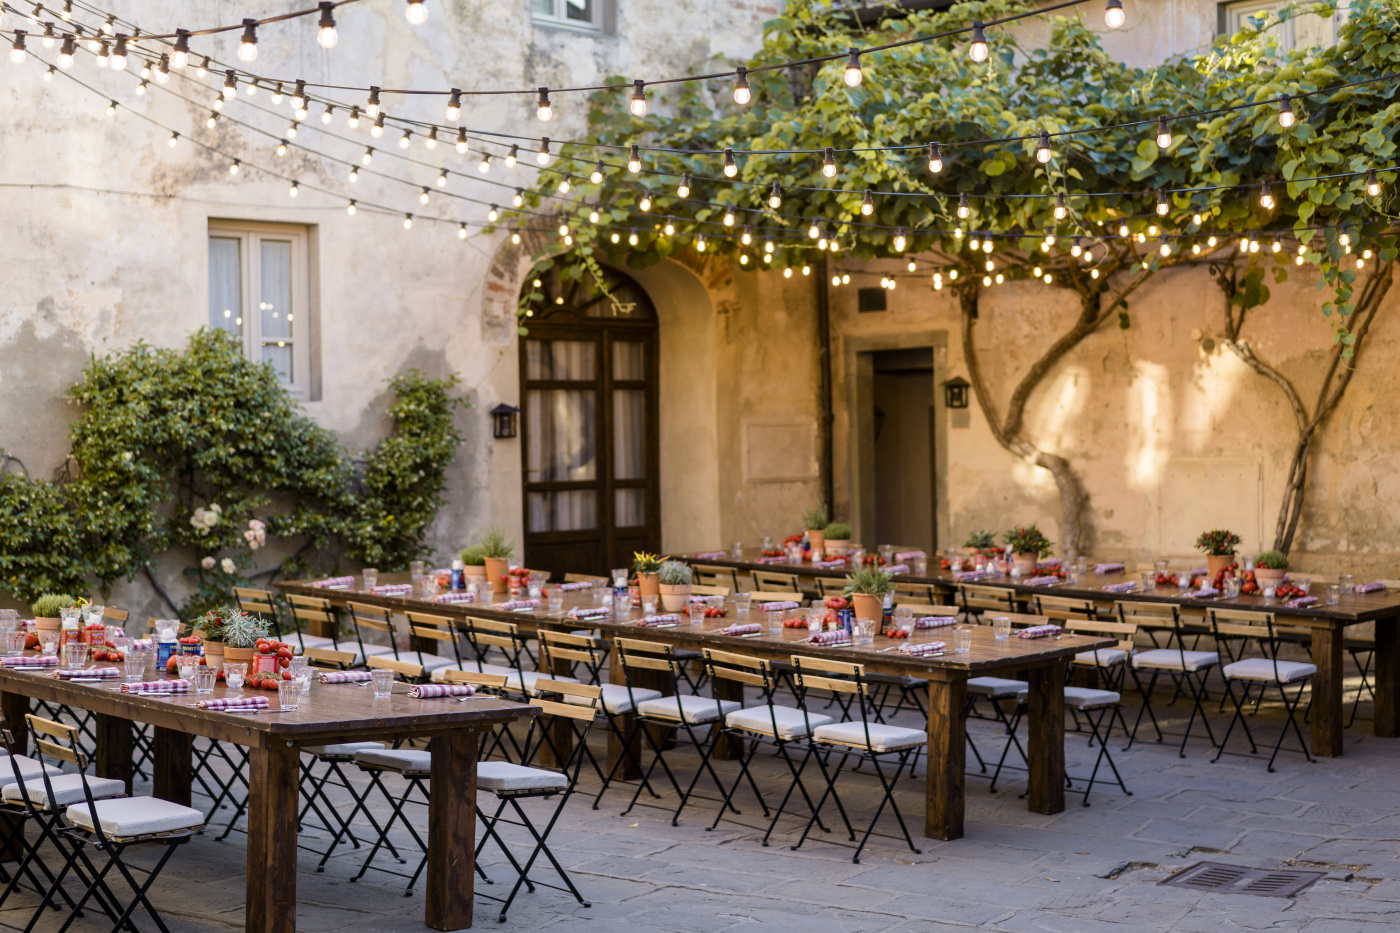 Wooden tables and rustic chairs for a market style welcome party in Italy